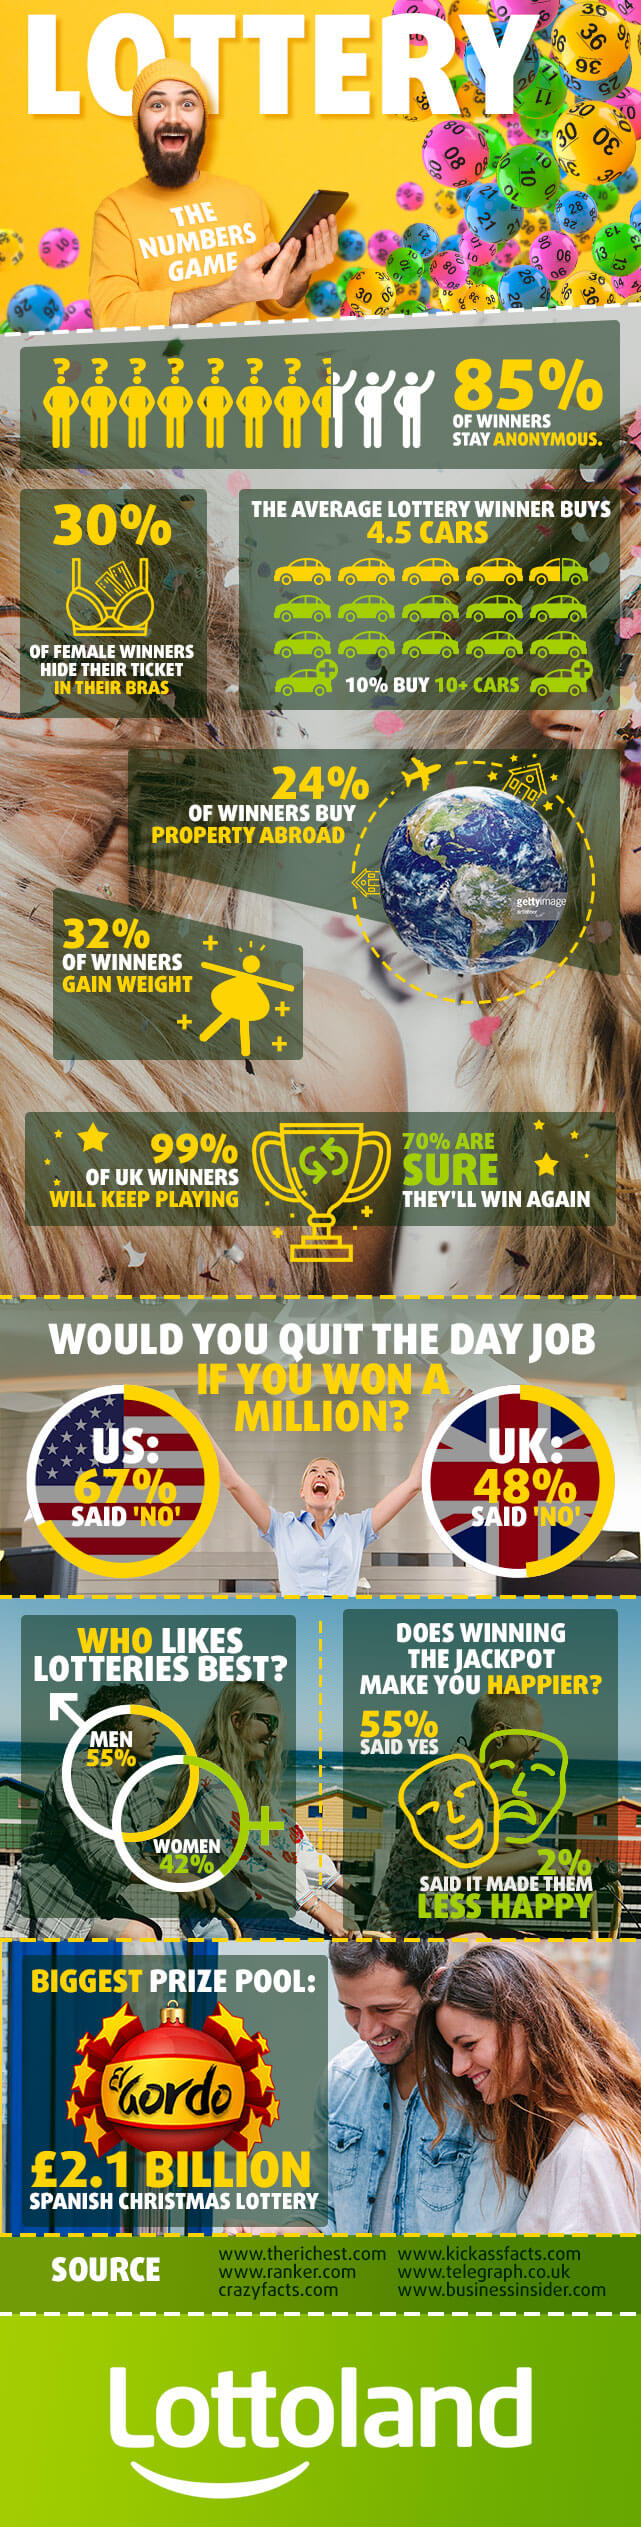 40 Fascinating Lottery Facts & Figures